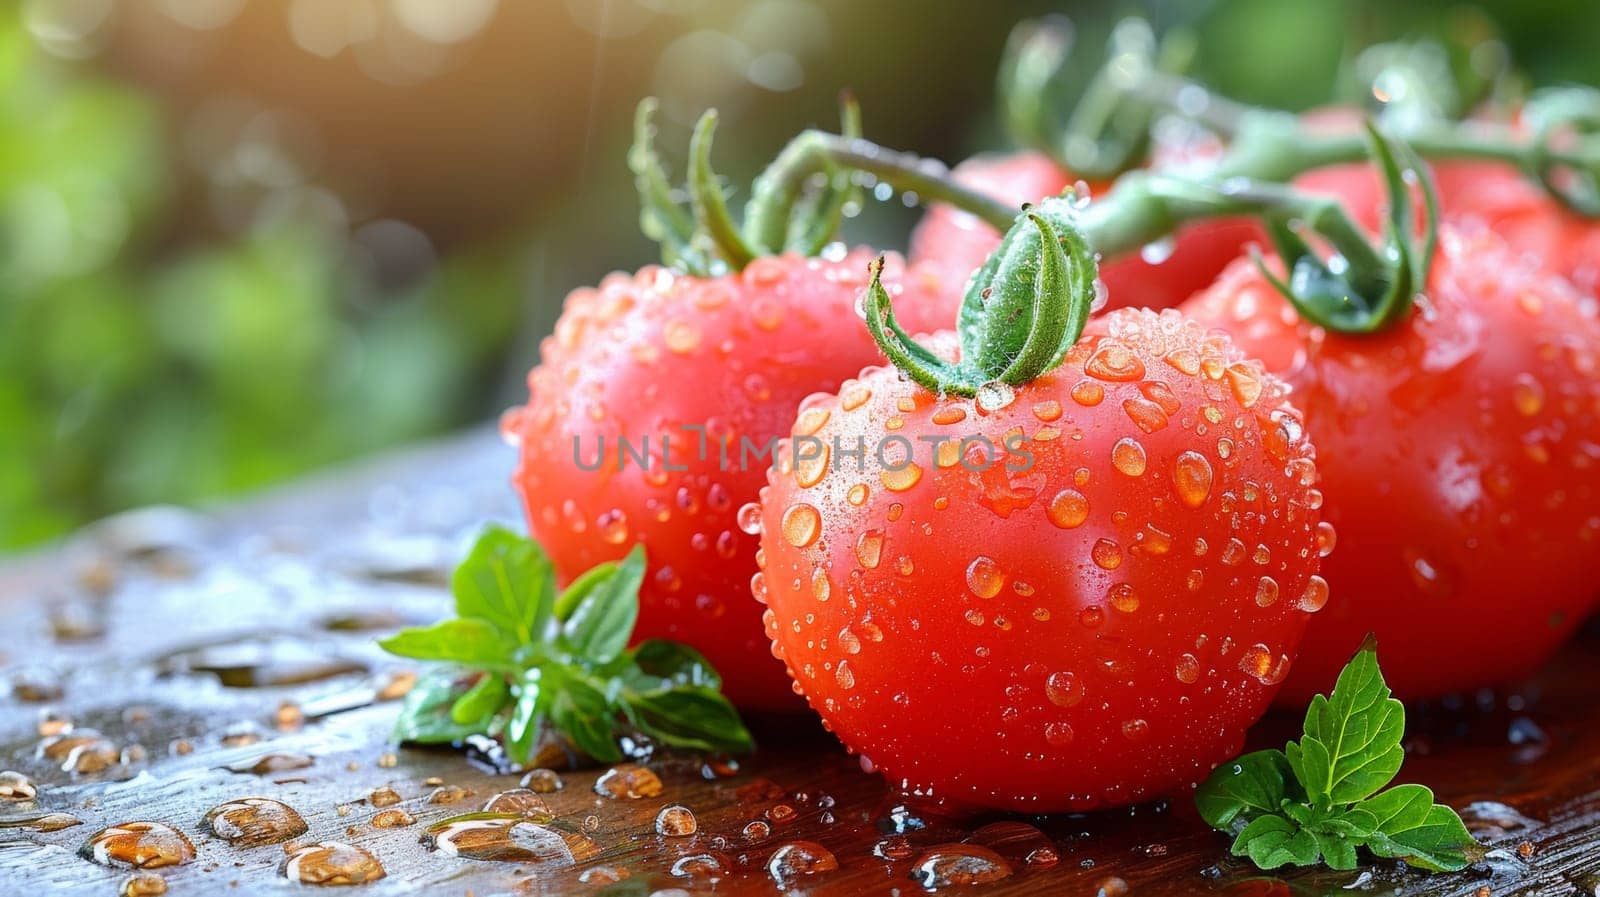 A bunch of tomatoes with water droplets on them sitting next to some leaves